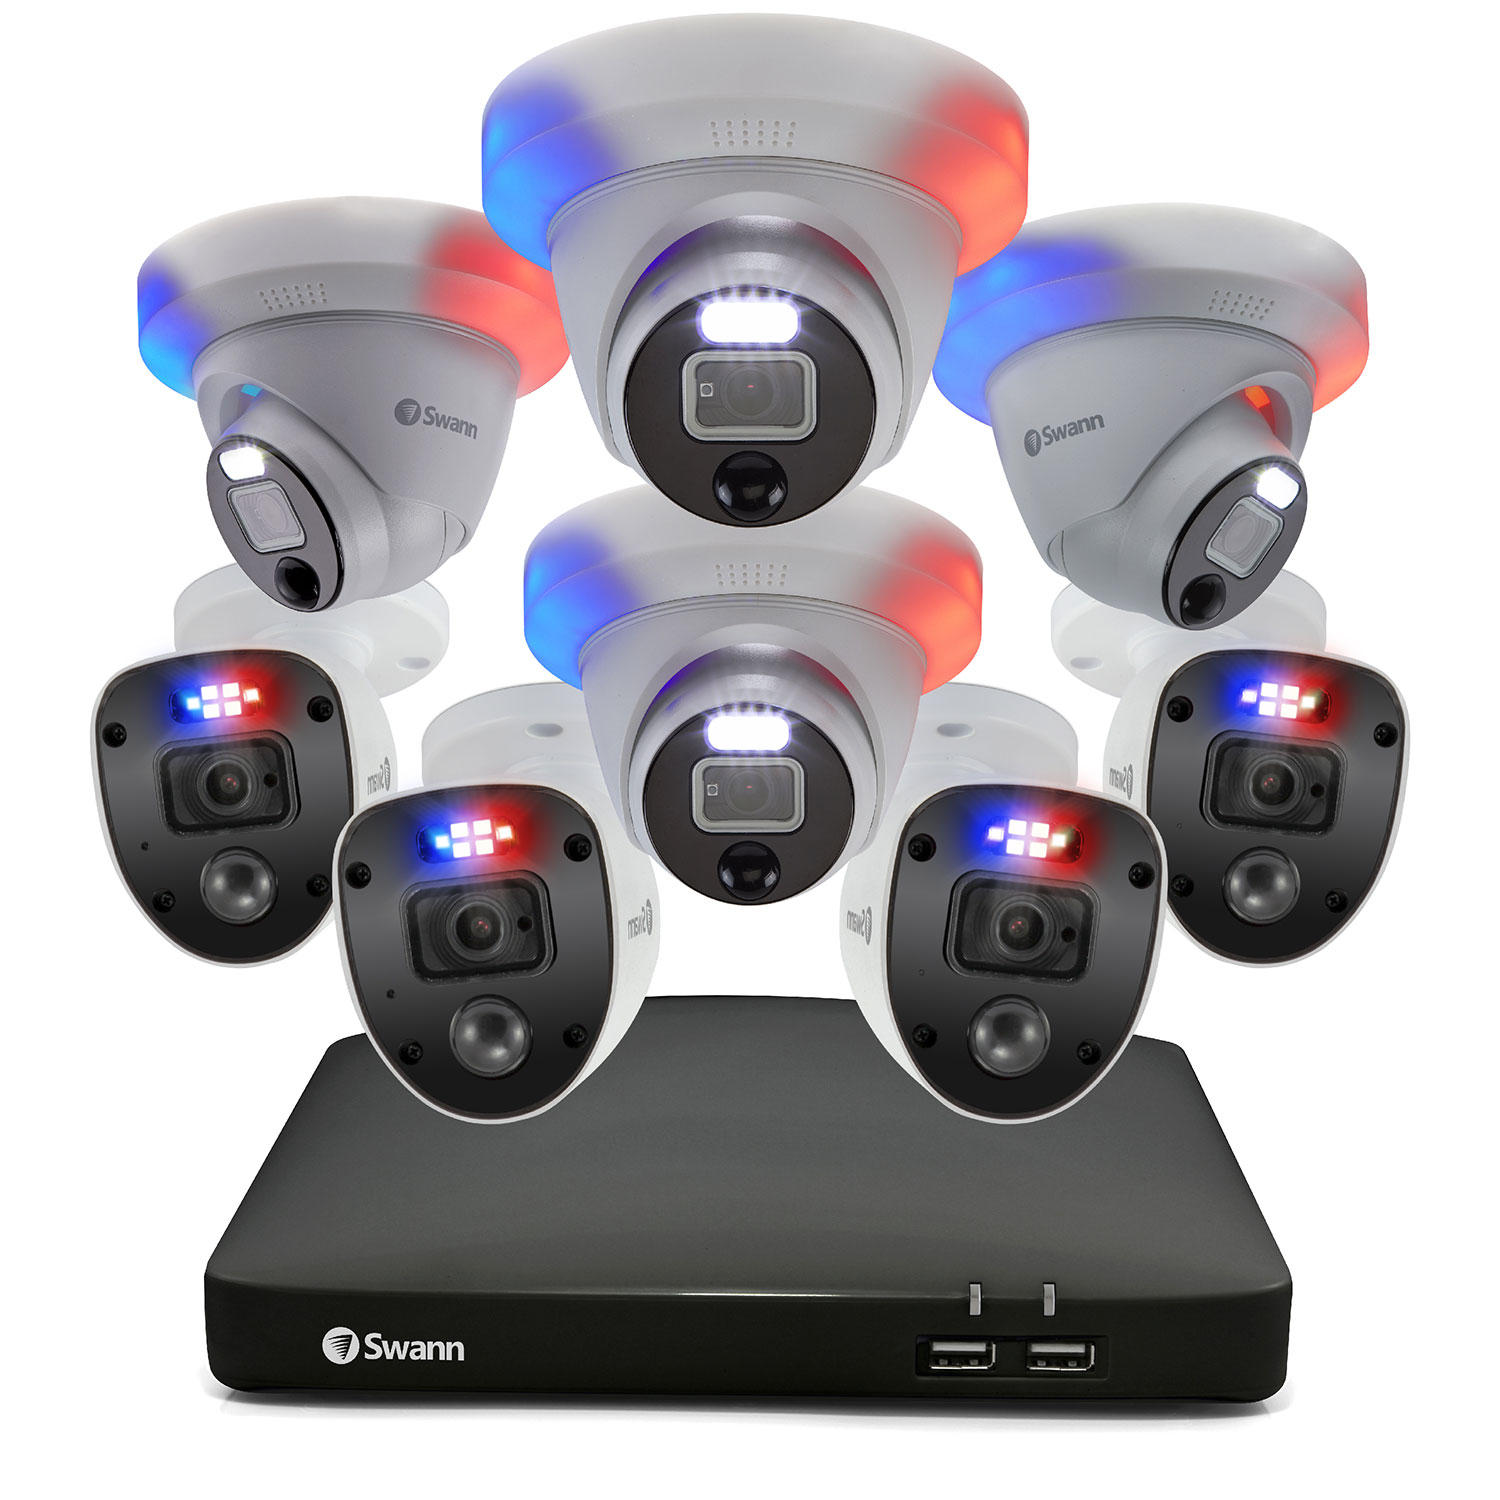 Swann Enforcer 8 Channel 1080p DVR CCTV with 8-Camera Wired Smart Security Surveillance System